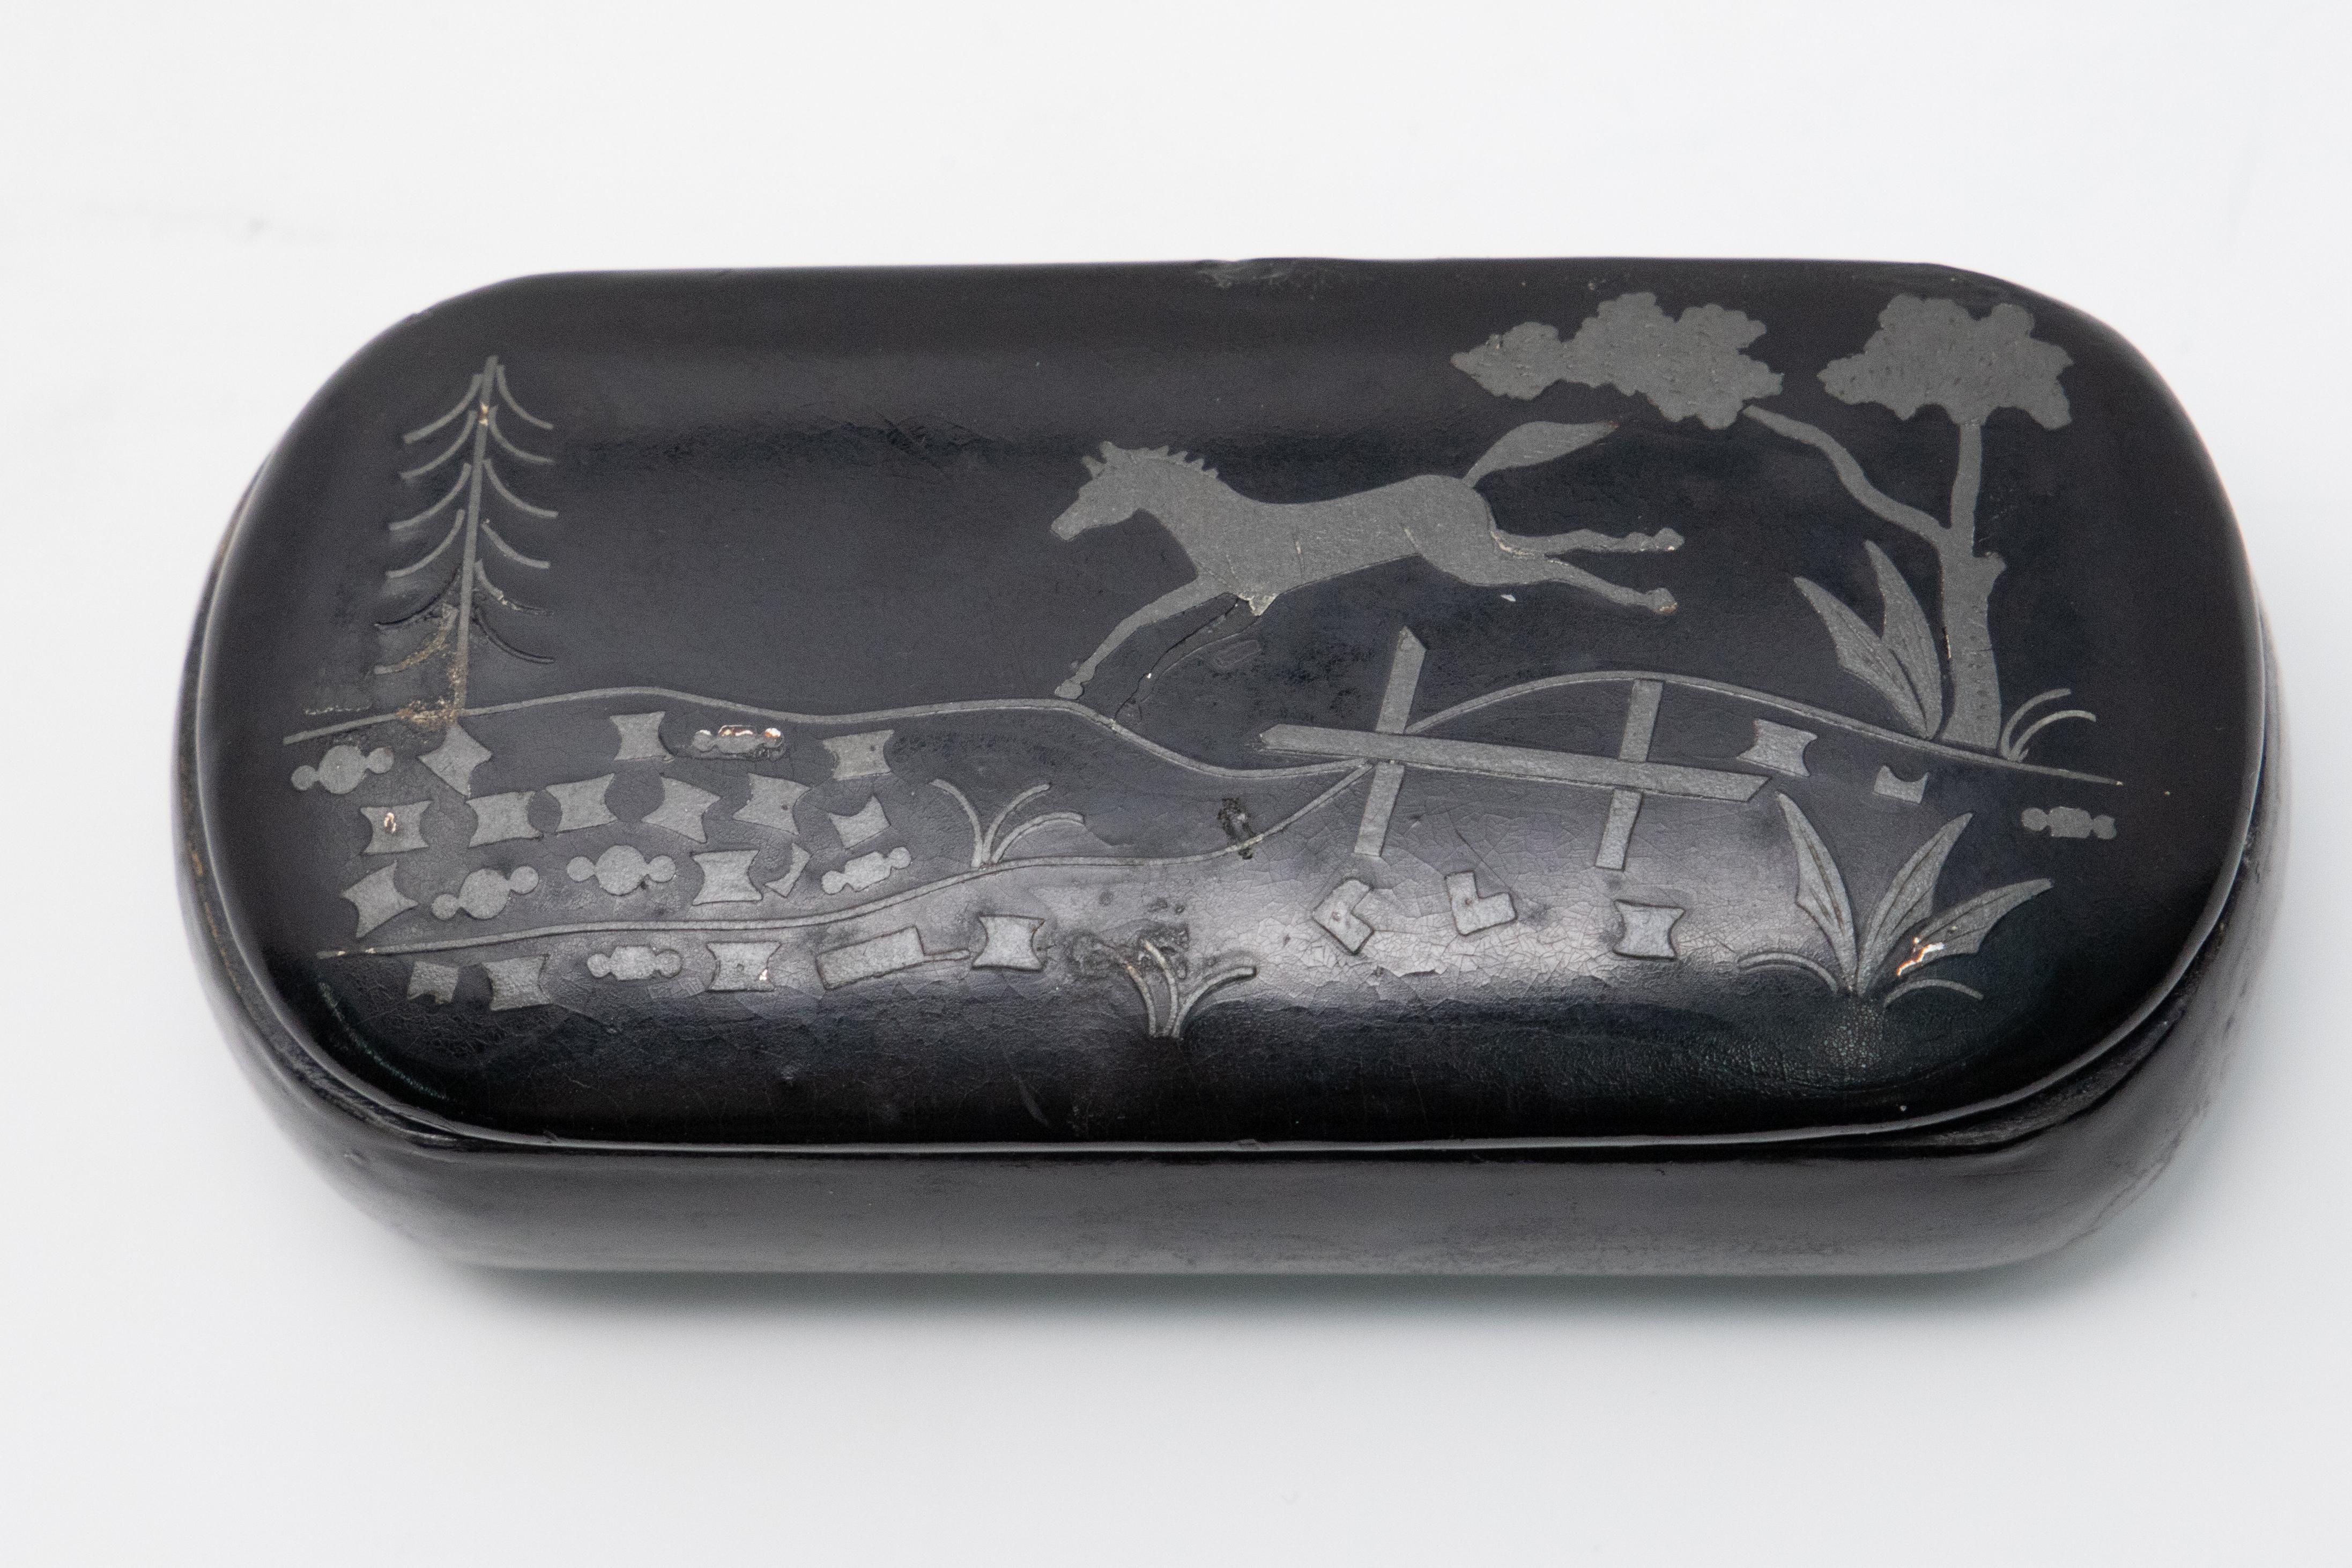 Gorgeous black lacquered snuff box with jumping horse scene. The scene is painted in enamel paint. The inside of box has zinc liner.